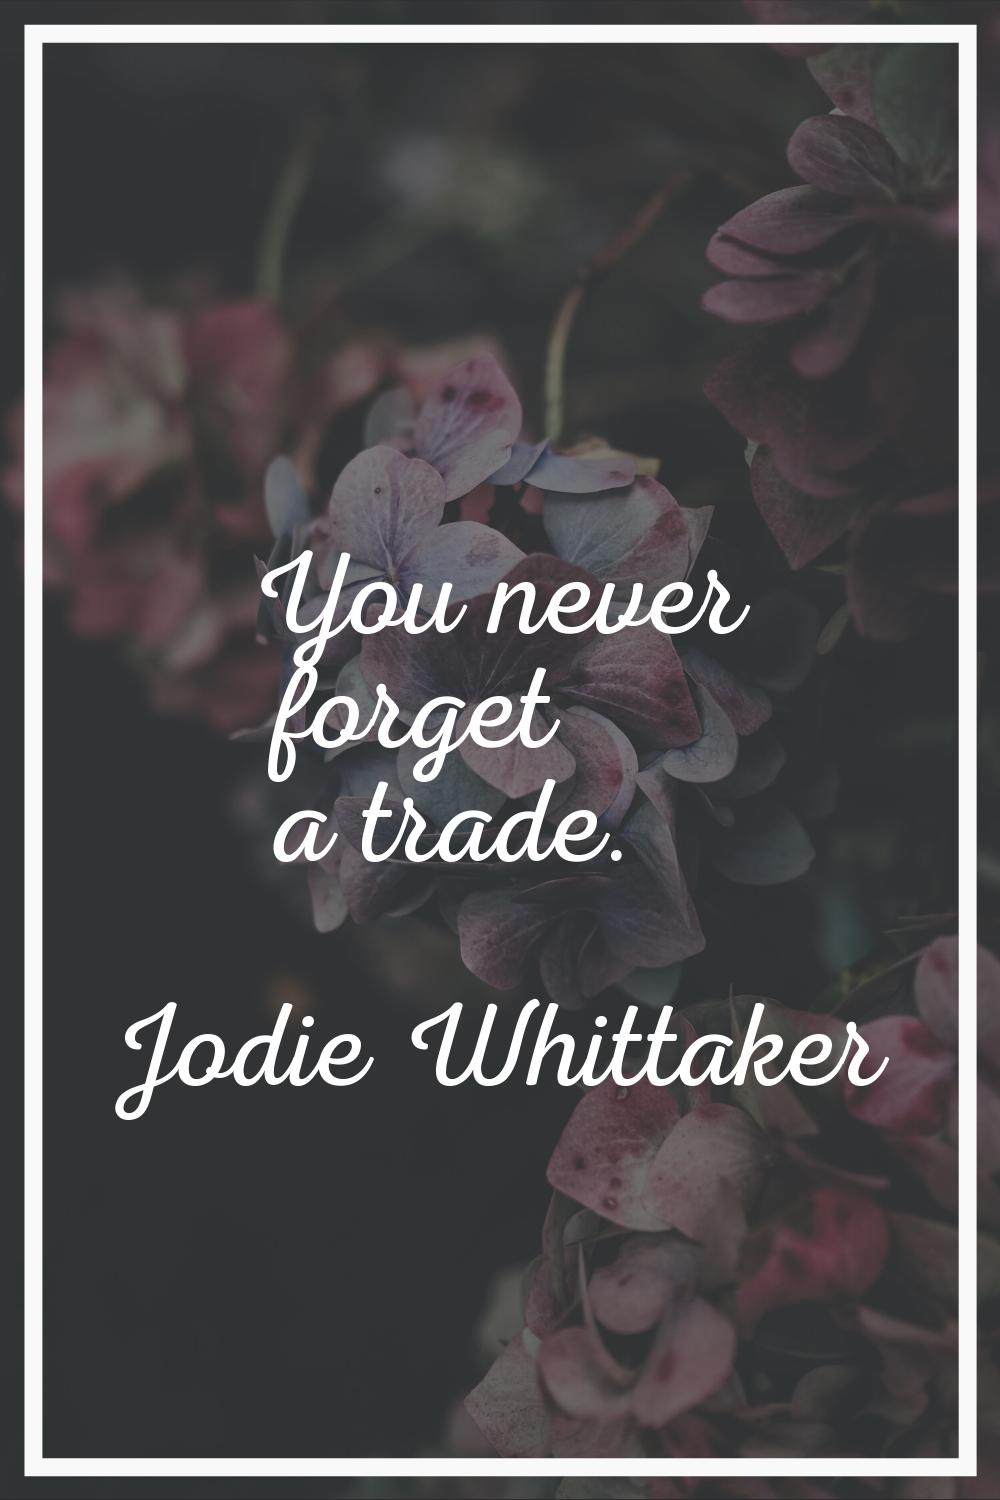 You never forget a trade.